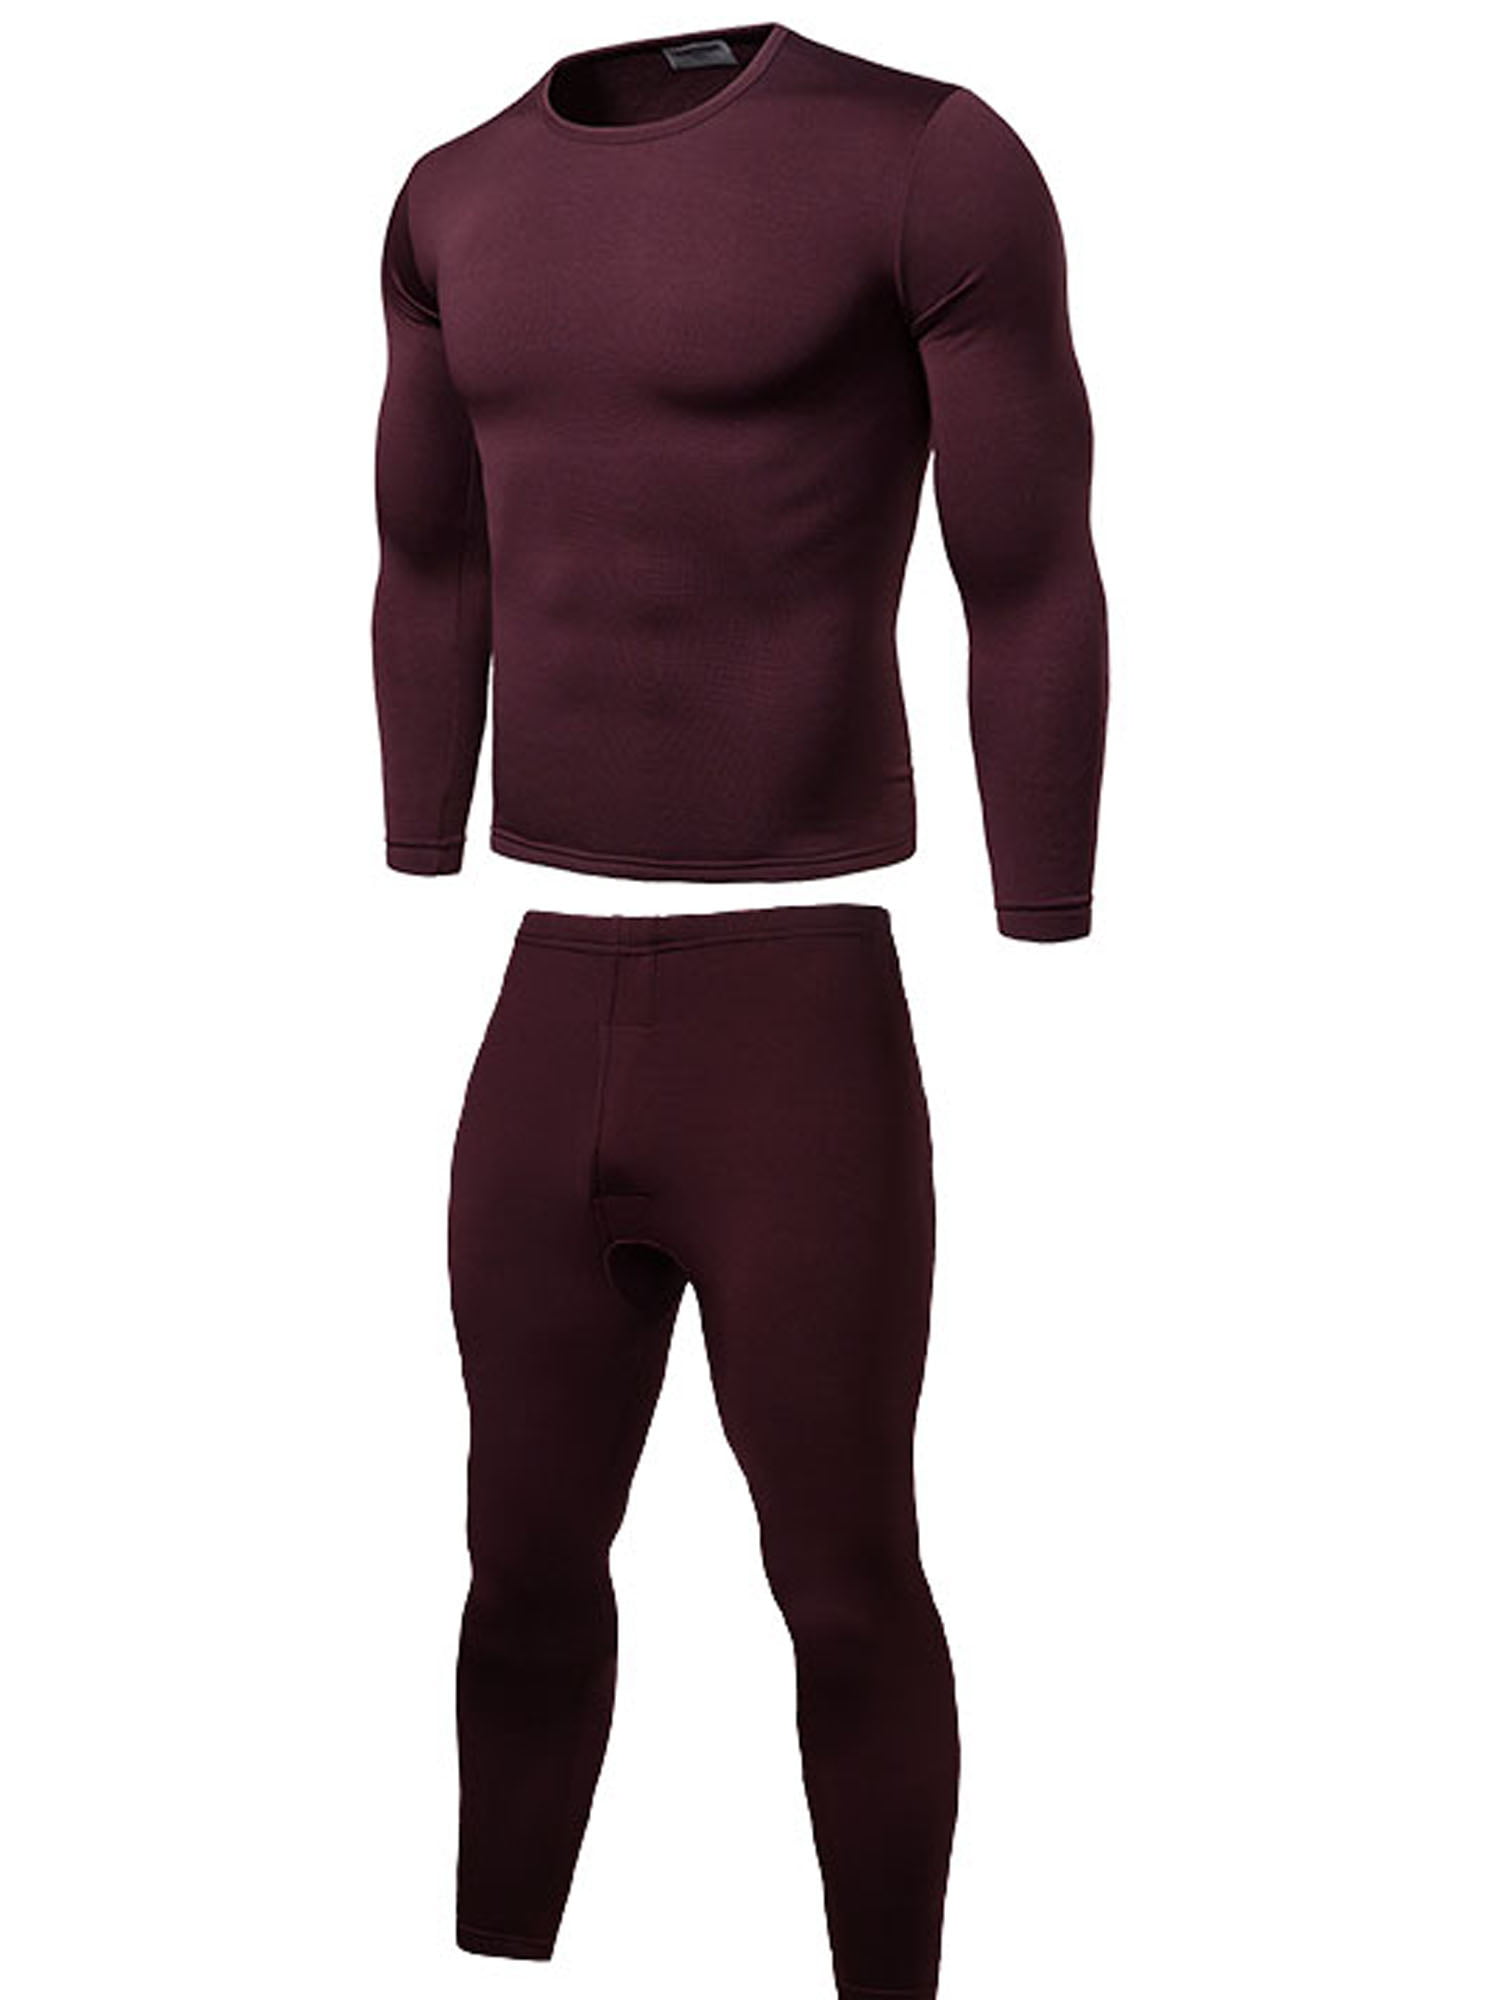 Rothco Heavyweight Thermal Knit Underwear Top